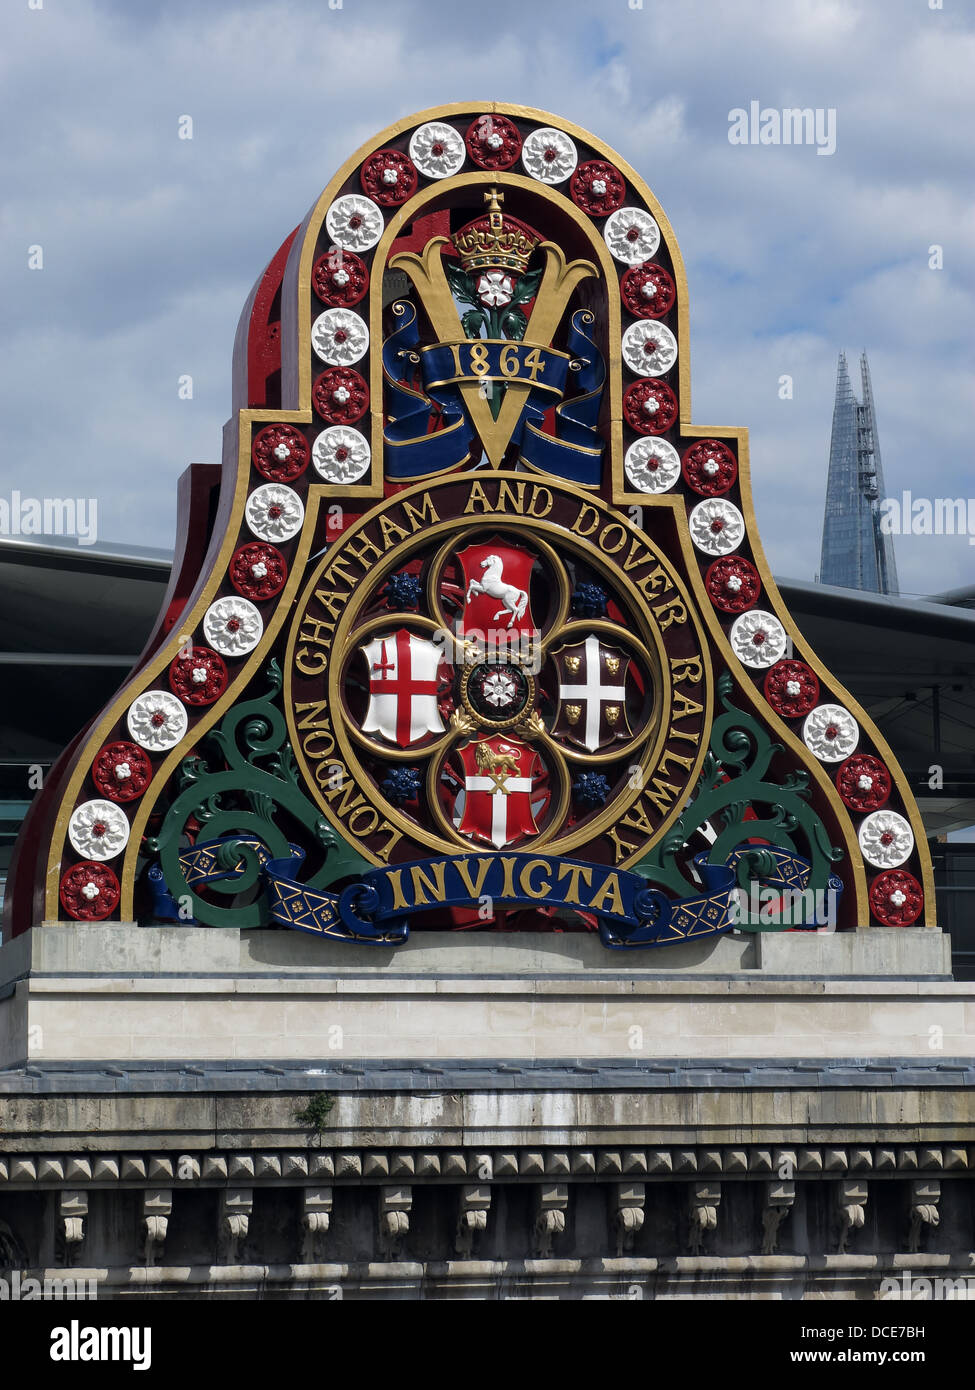 London Chatham and Dover railway Invicta bridge support at Blackfriars London, England with The Shard in the background. Stock Photo